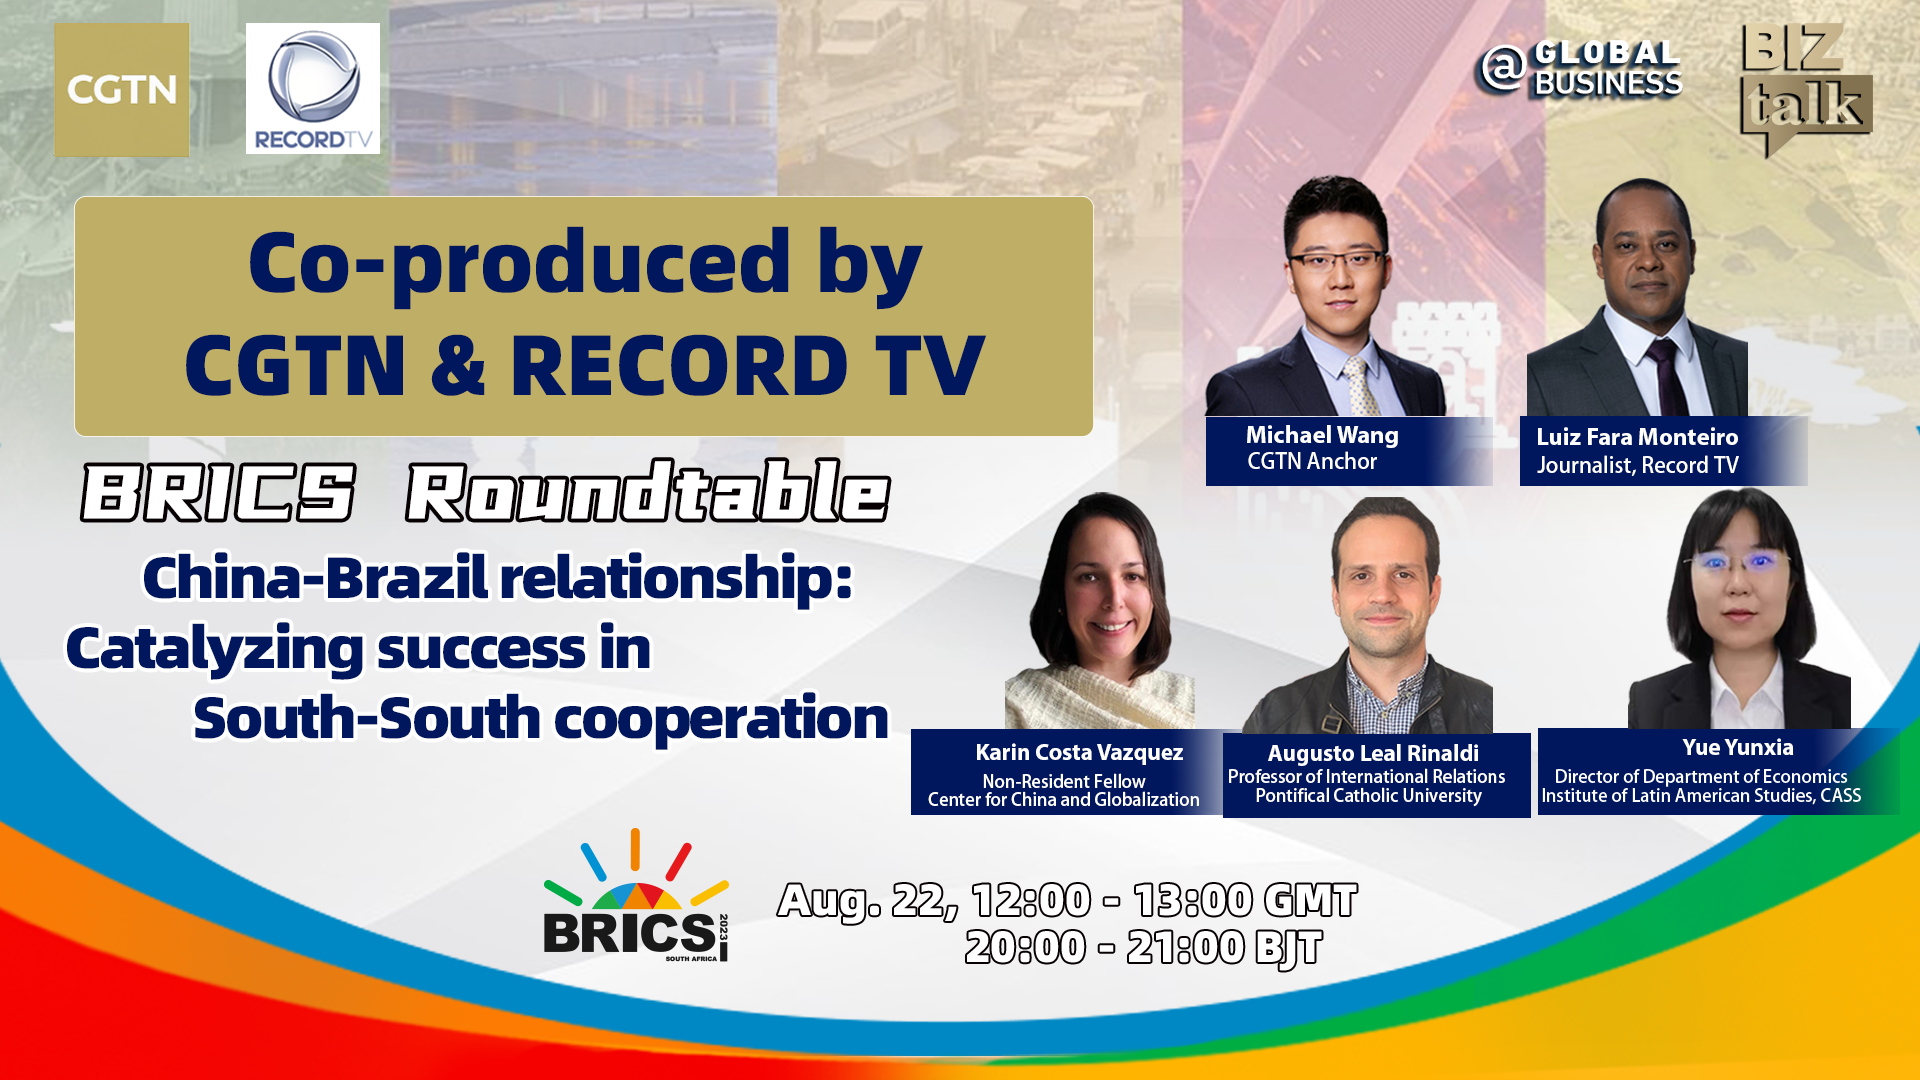 BRICS Roundtable: Catalyzing success in South-South cooperation